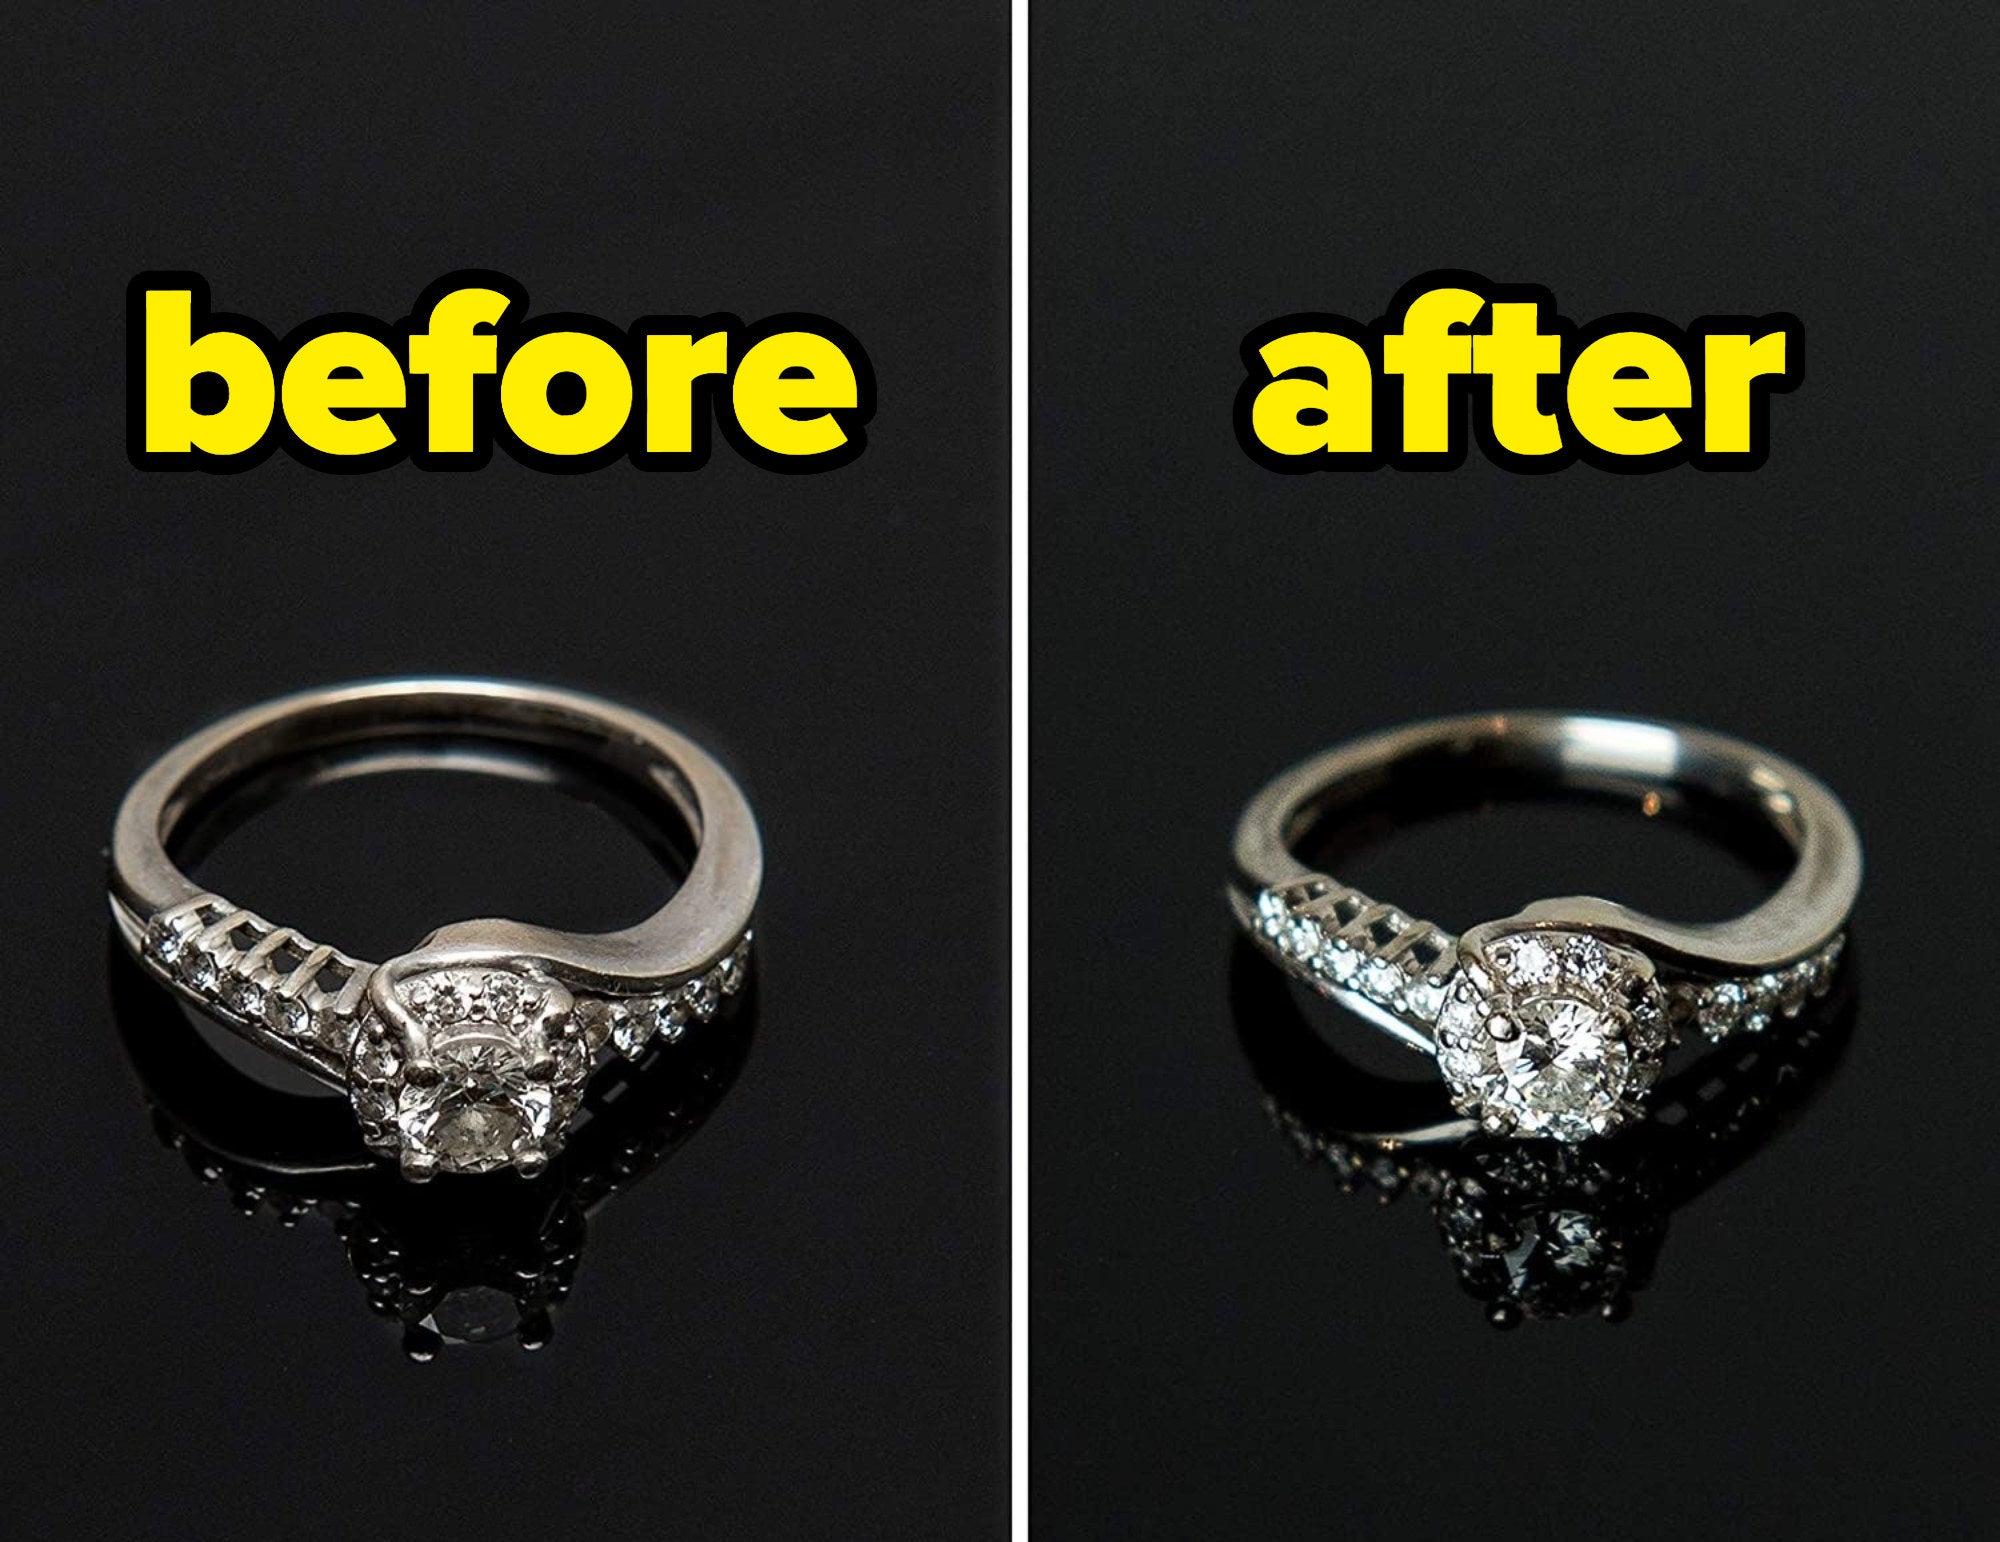 A ring before and after being cleaned with the ultrasonic jewellery cleaner